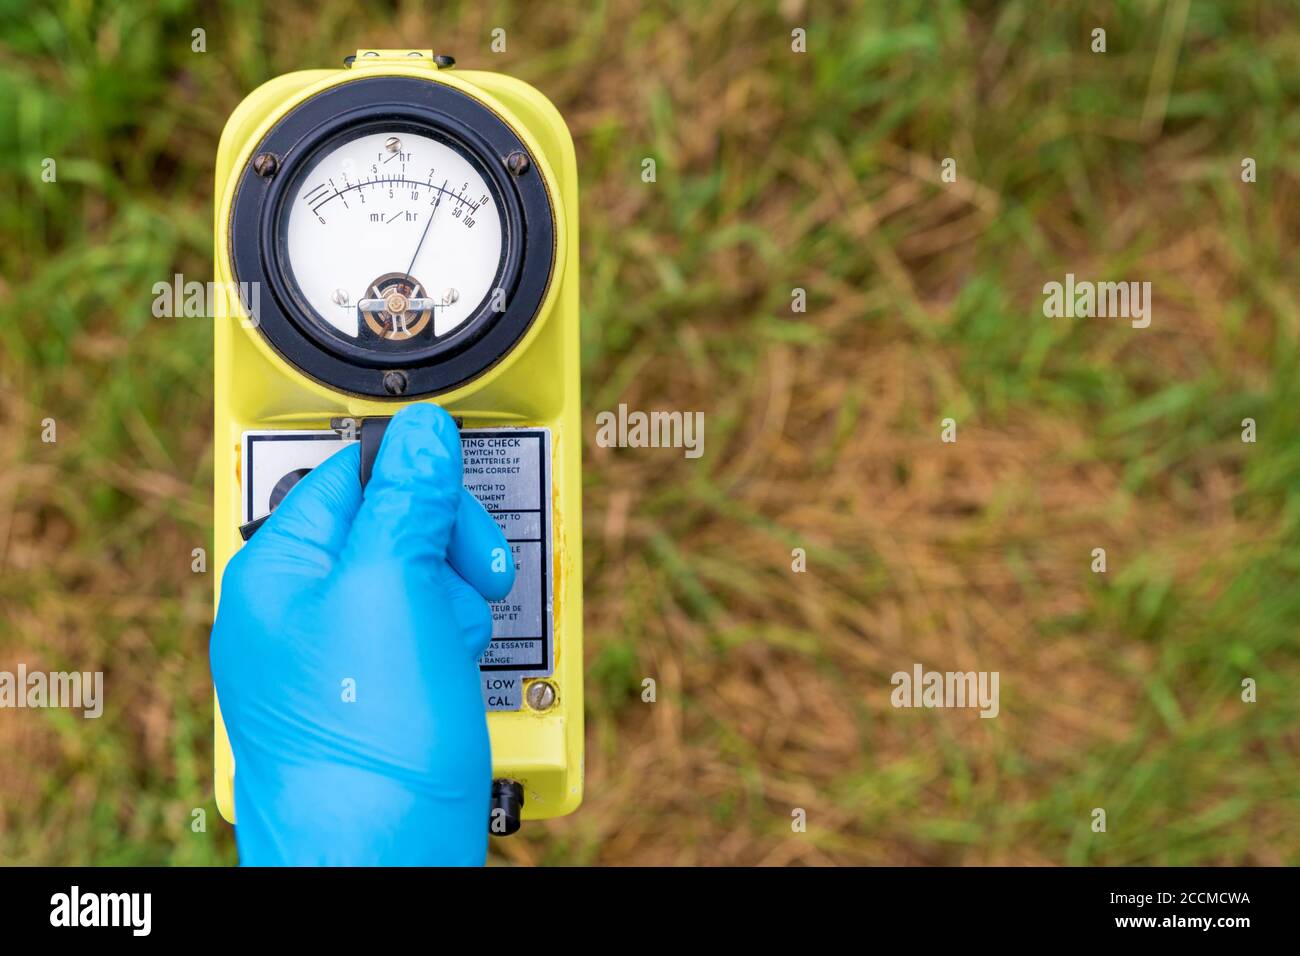 A blue gloved hand holds a radiation meter. The meter shows a high level of radiation. Grass in the background, most of which is brown and dead. Stock Photo